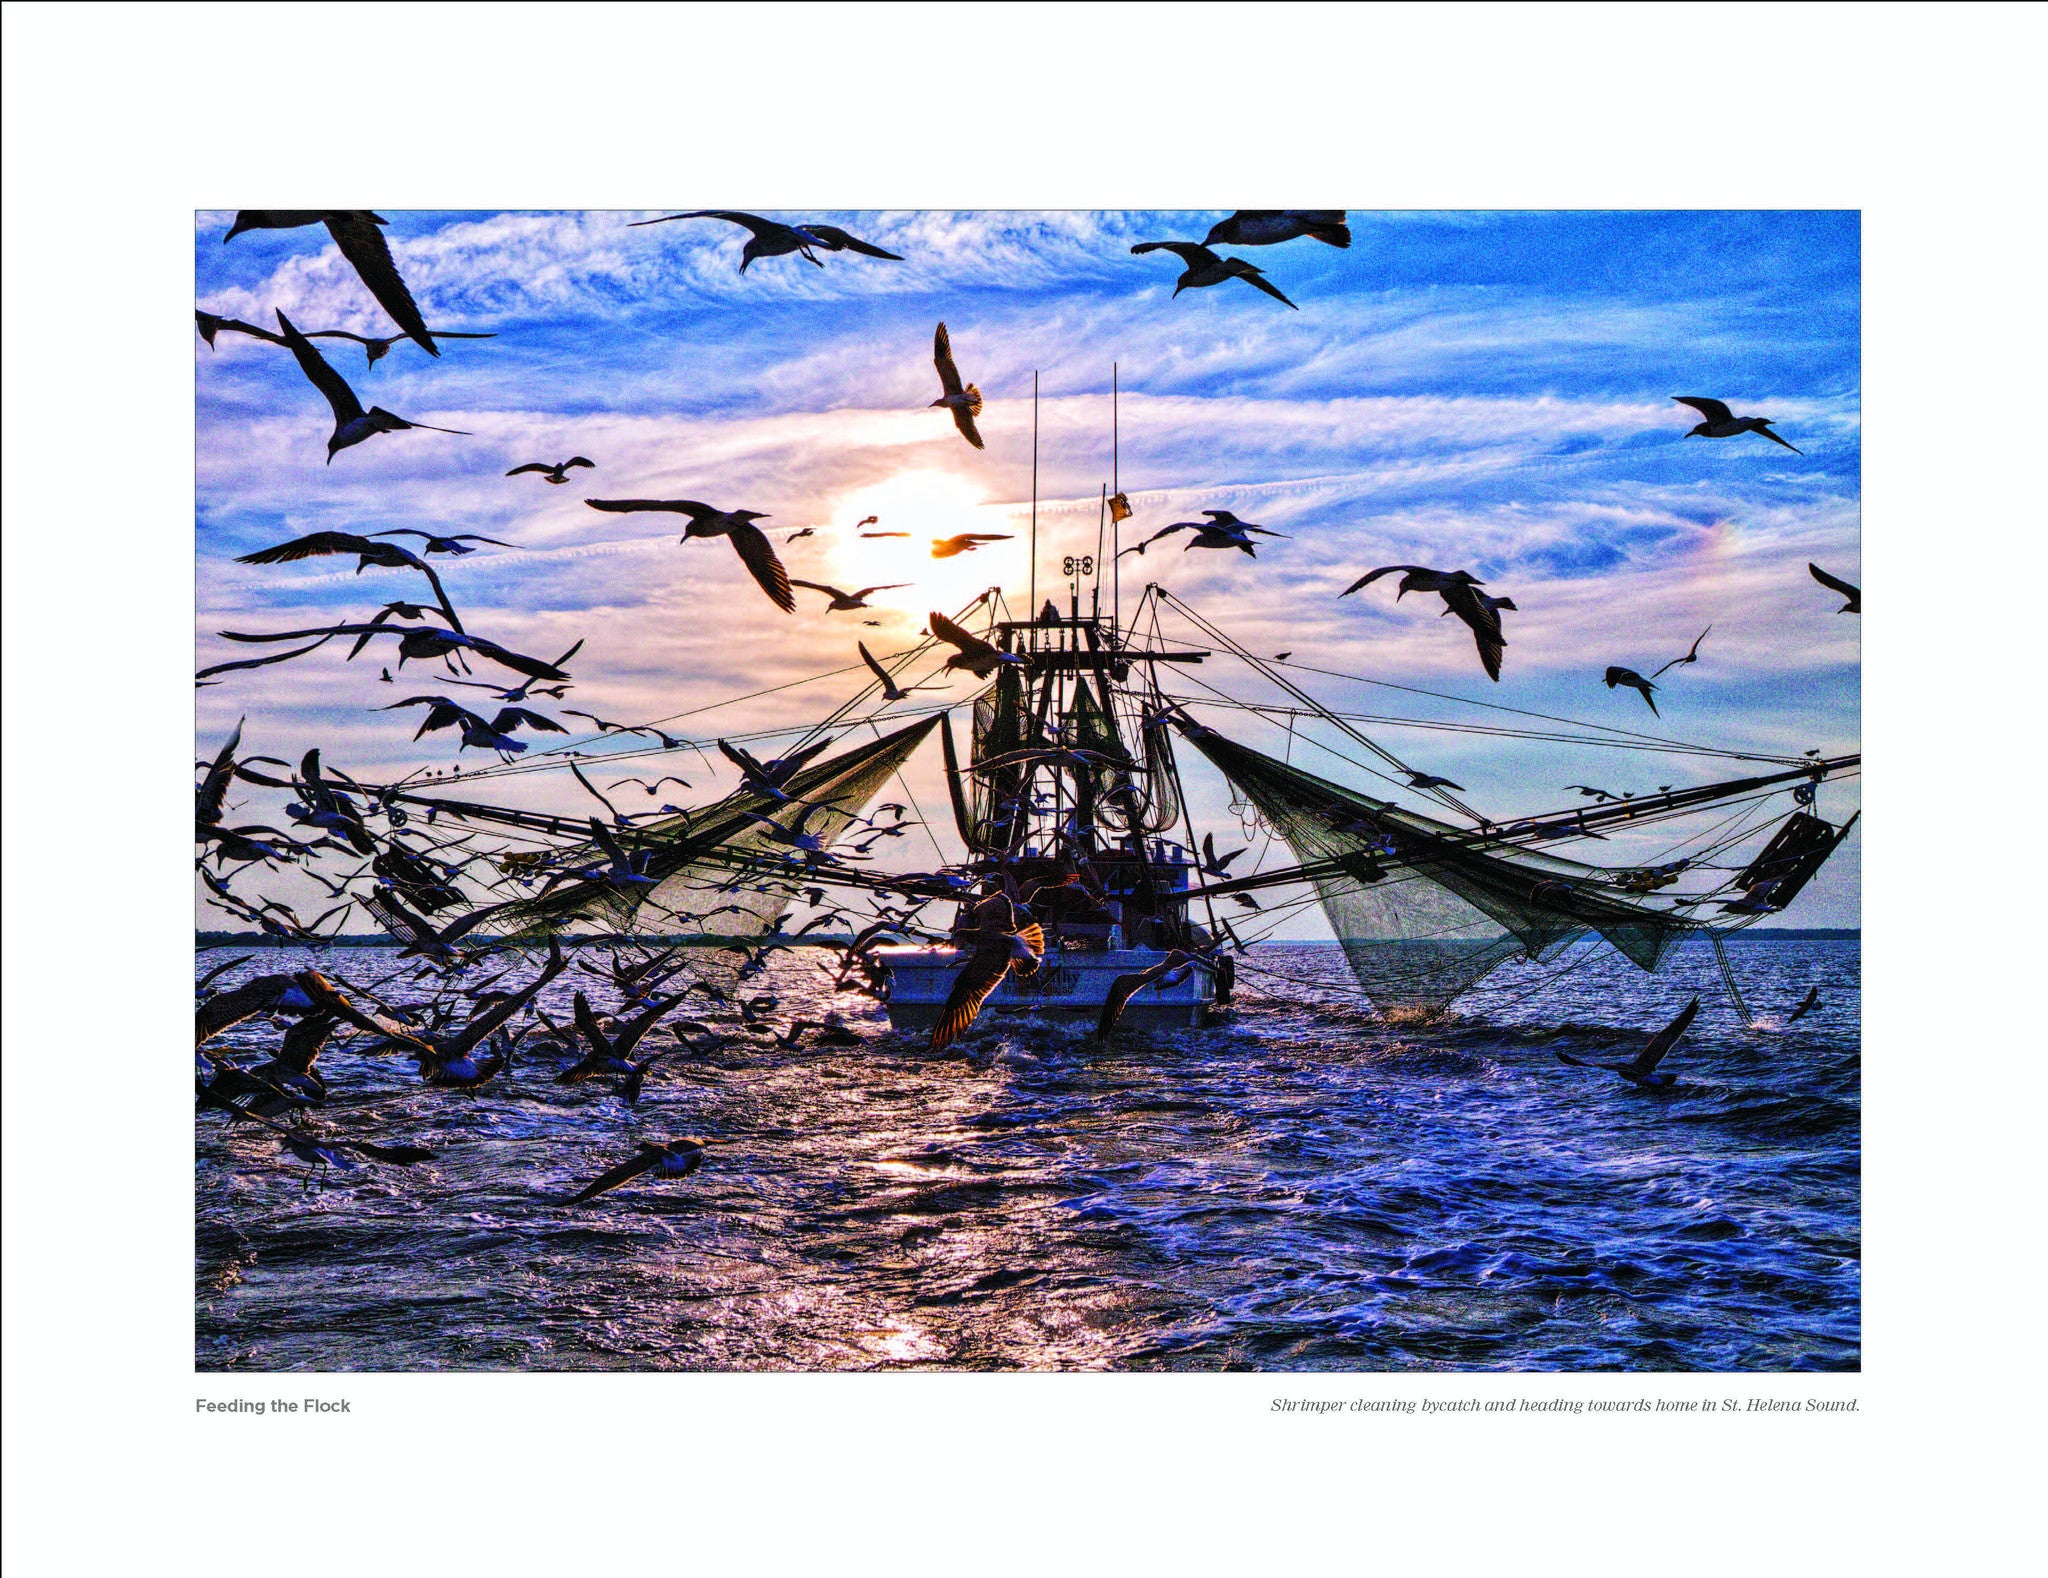 Feeding The Flock: Shrimper cleaning bycatch St. Helena Sound Beholding Nature Eric Horan photography book Starbooks